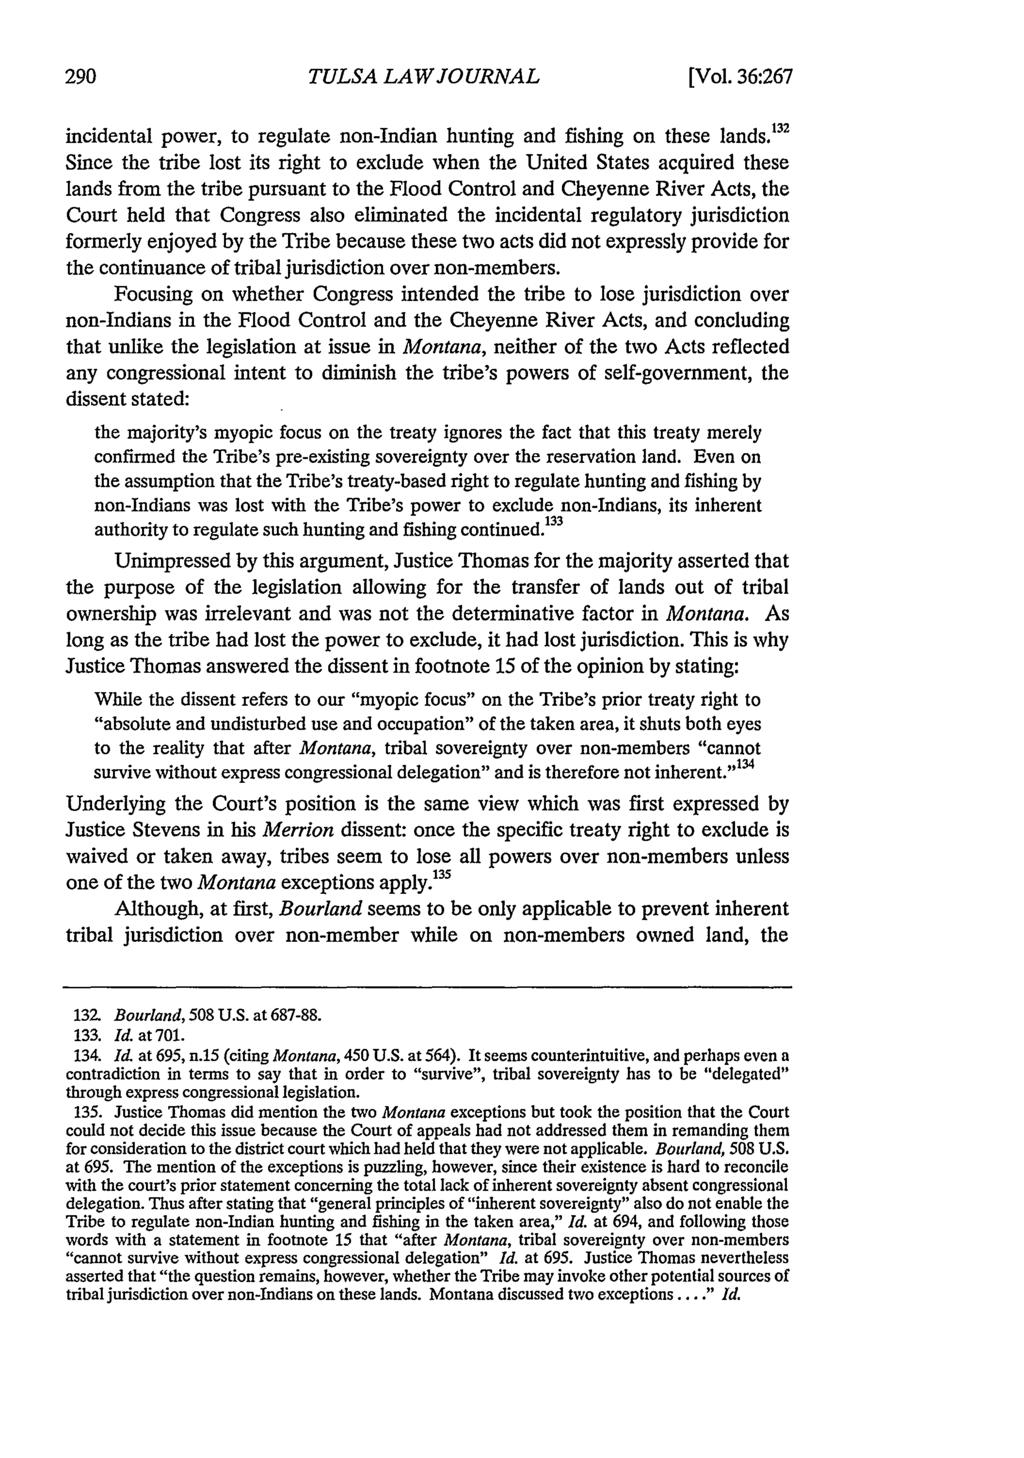 Tulsa Law Review, Vol. 36 [2000], Iss. 2, Art. 2 TULSA LAW JOURNAL [Vol. 36:267 incidental power, to regulate non-indian hunting and fishing on these lands.